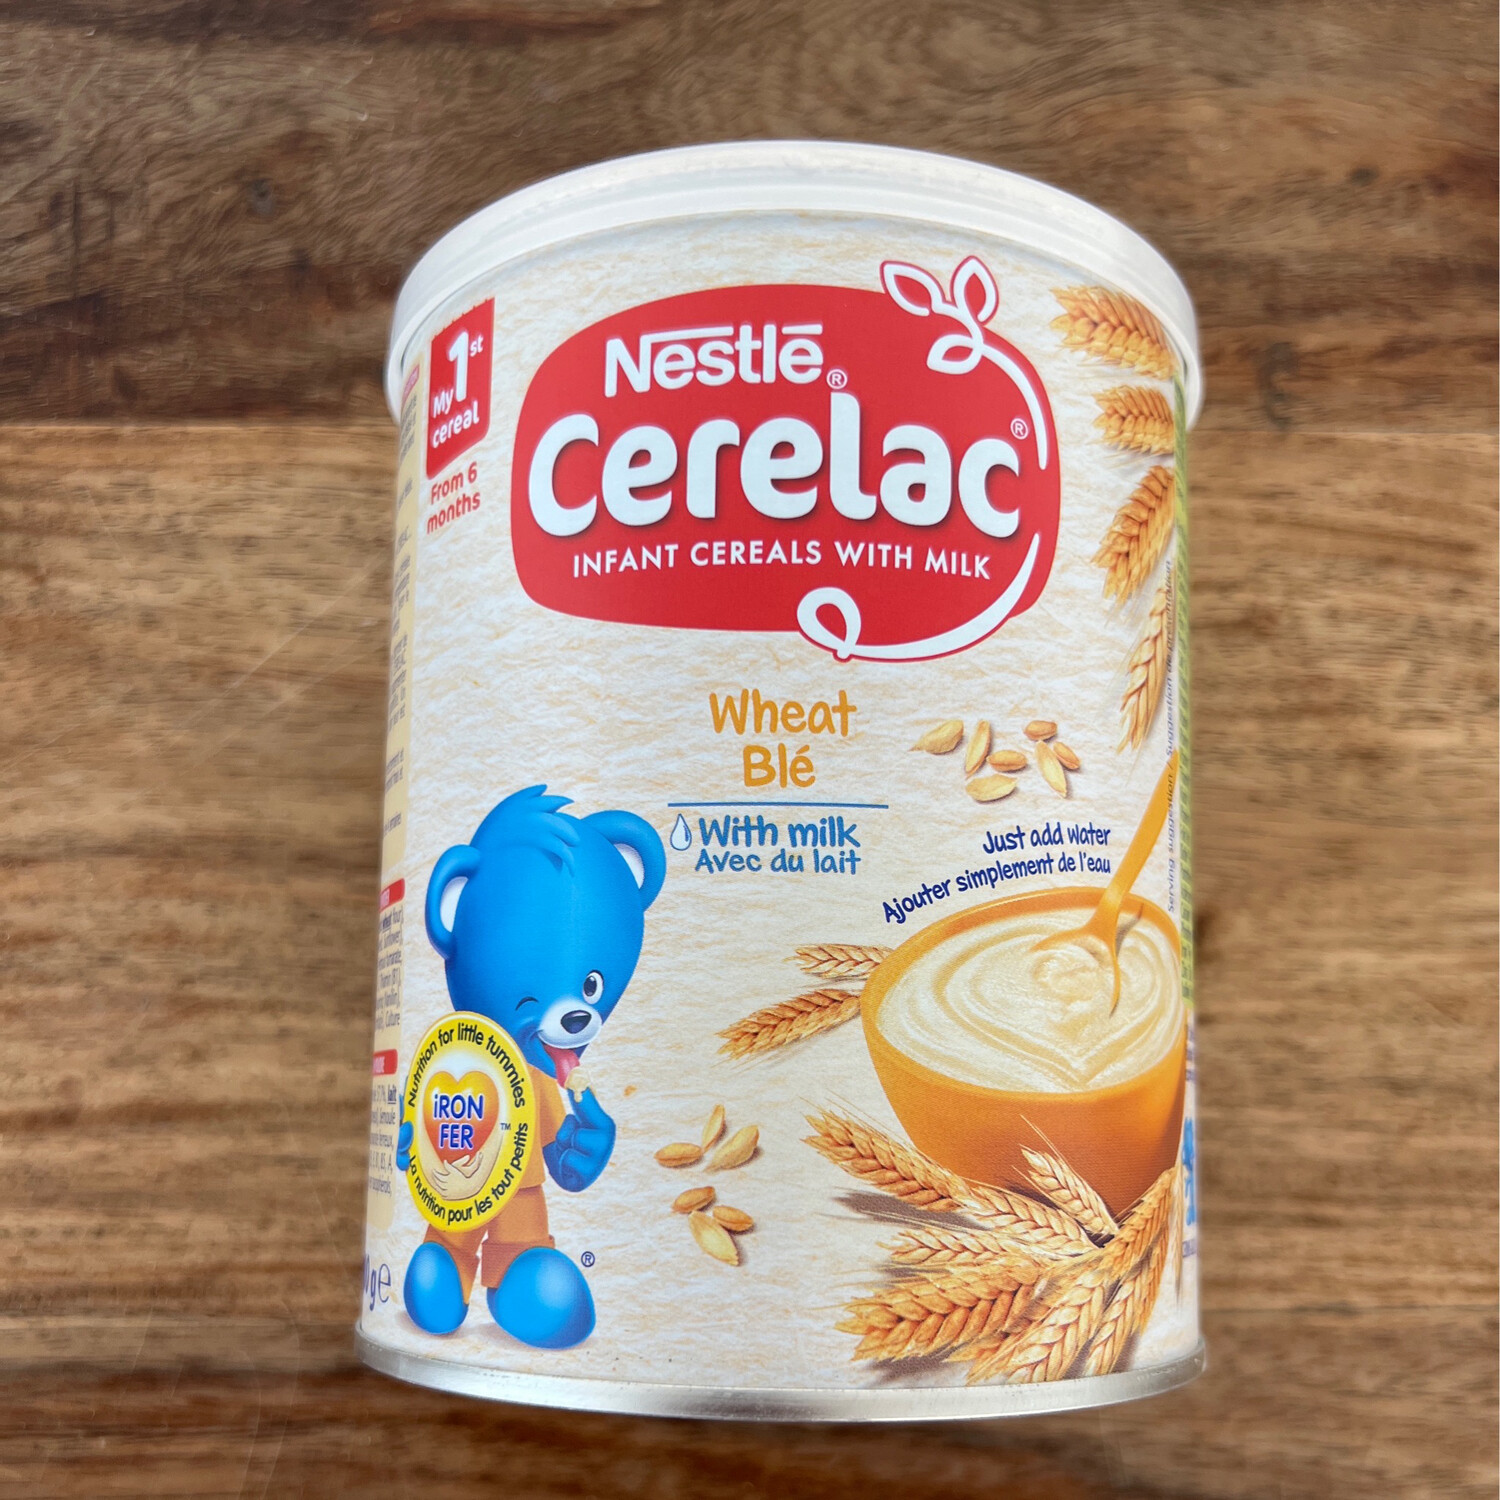 Nestle Cerelac Infant Cereals With Milk Wheat Ble